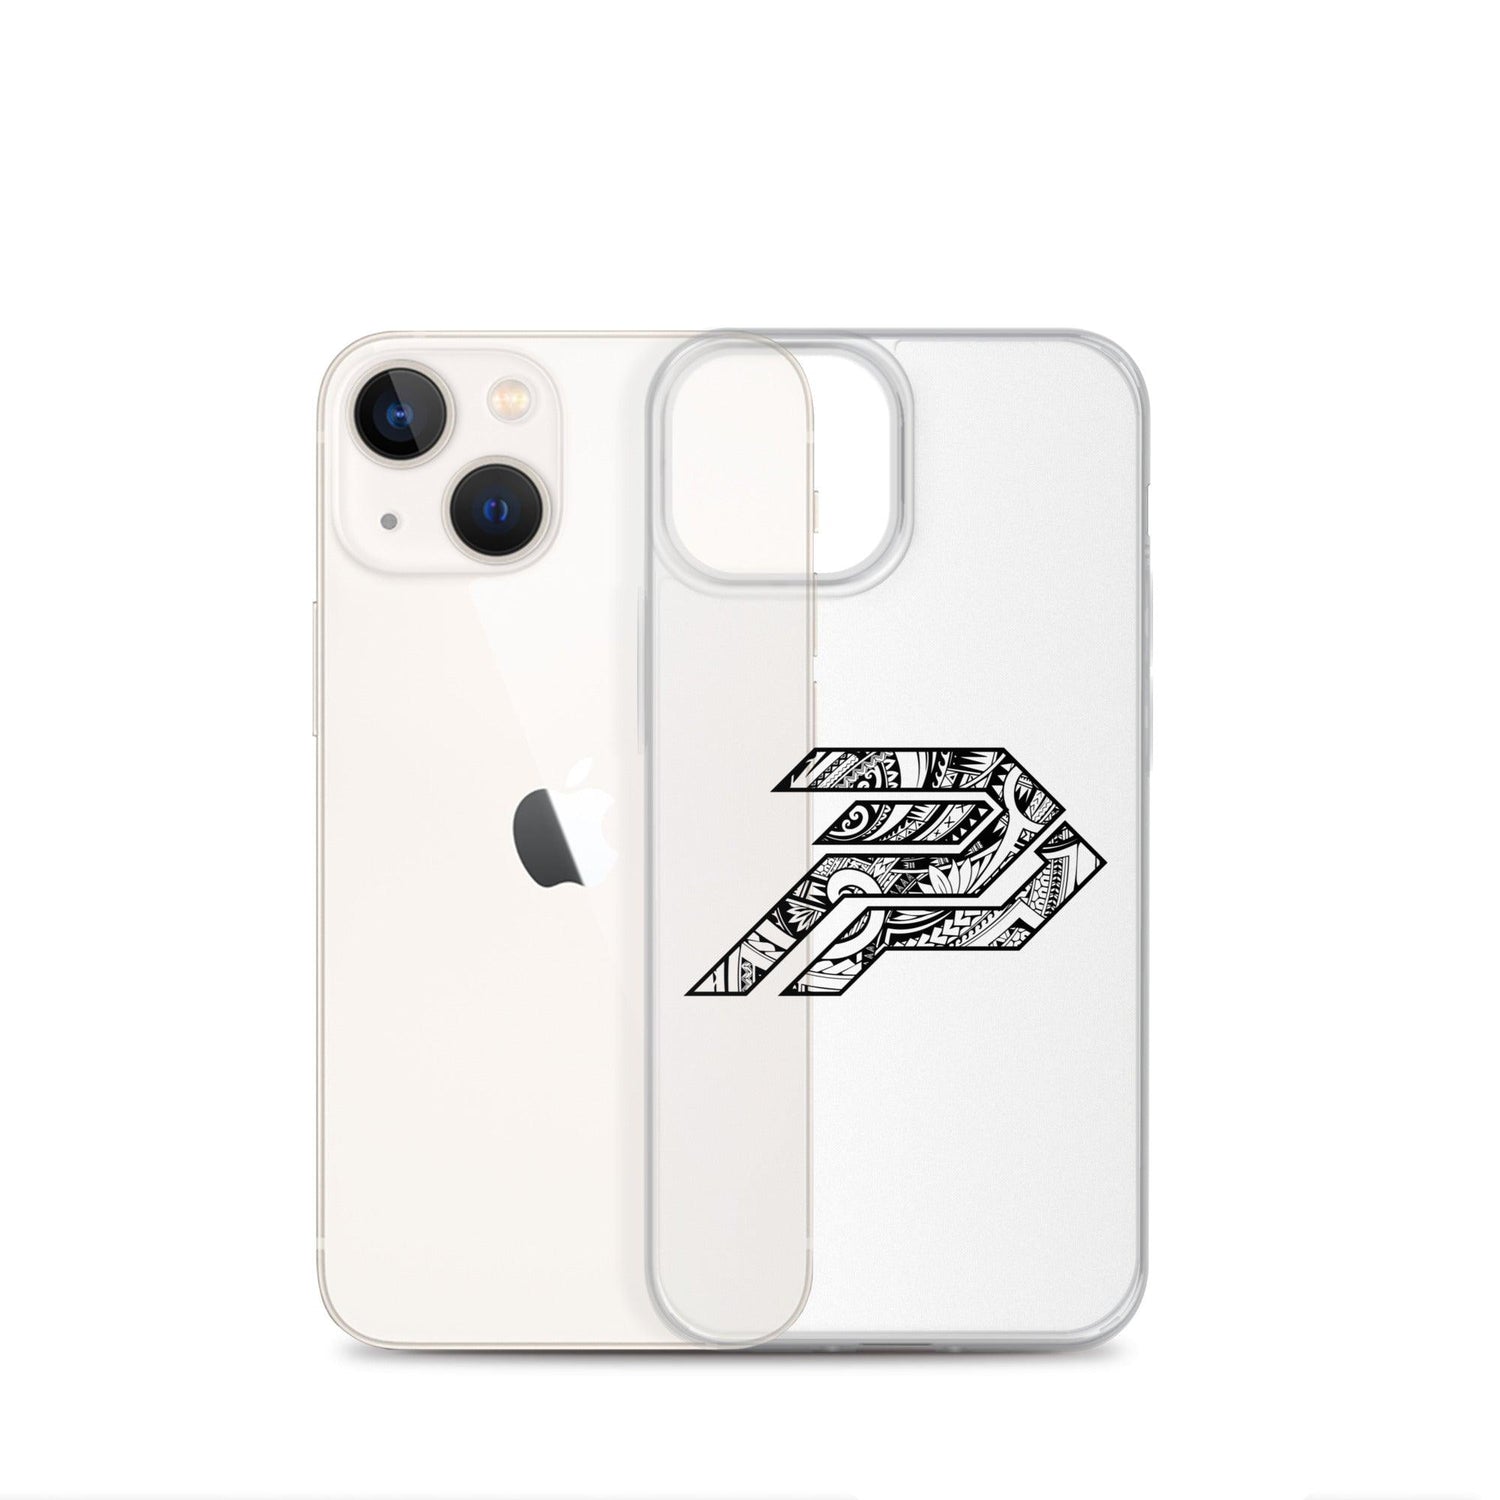 Phill Paea "Homegrown" iPhone Case - Fan Arch